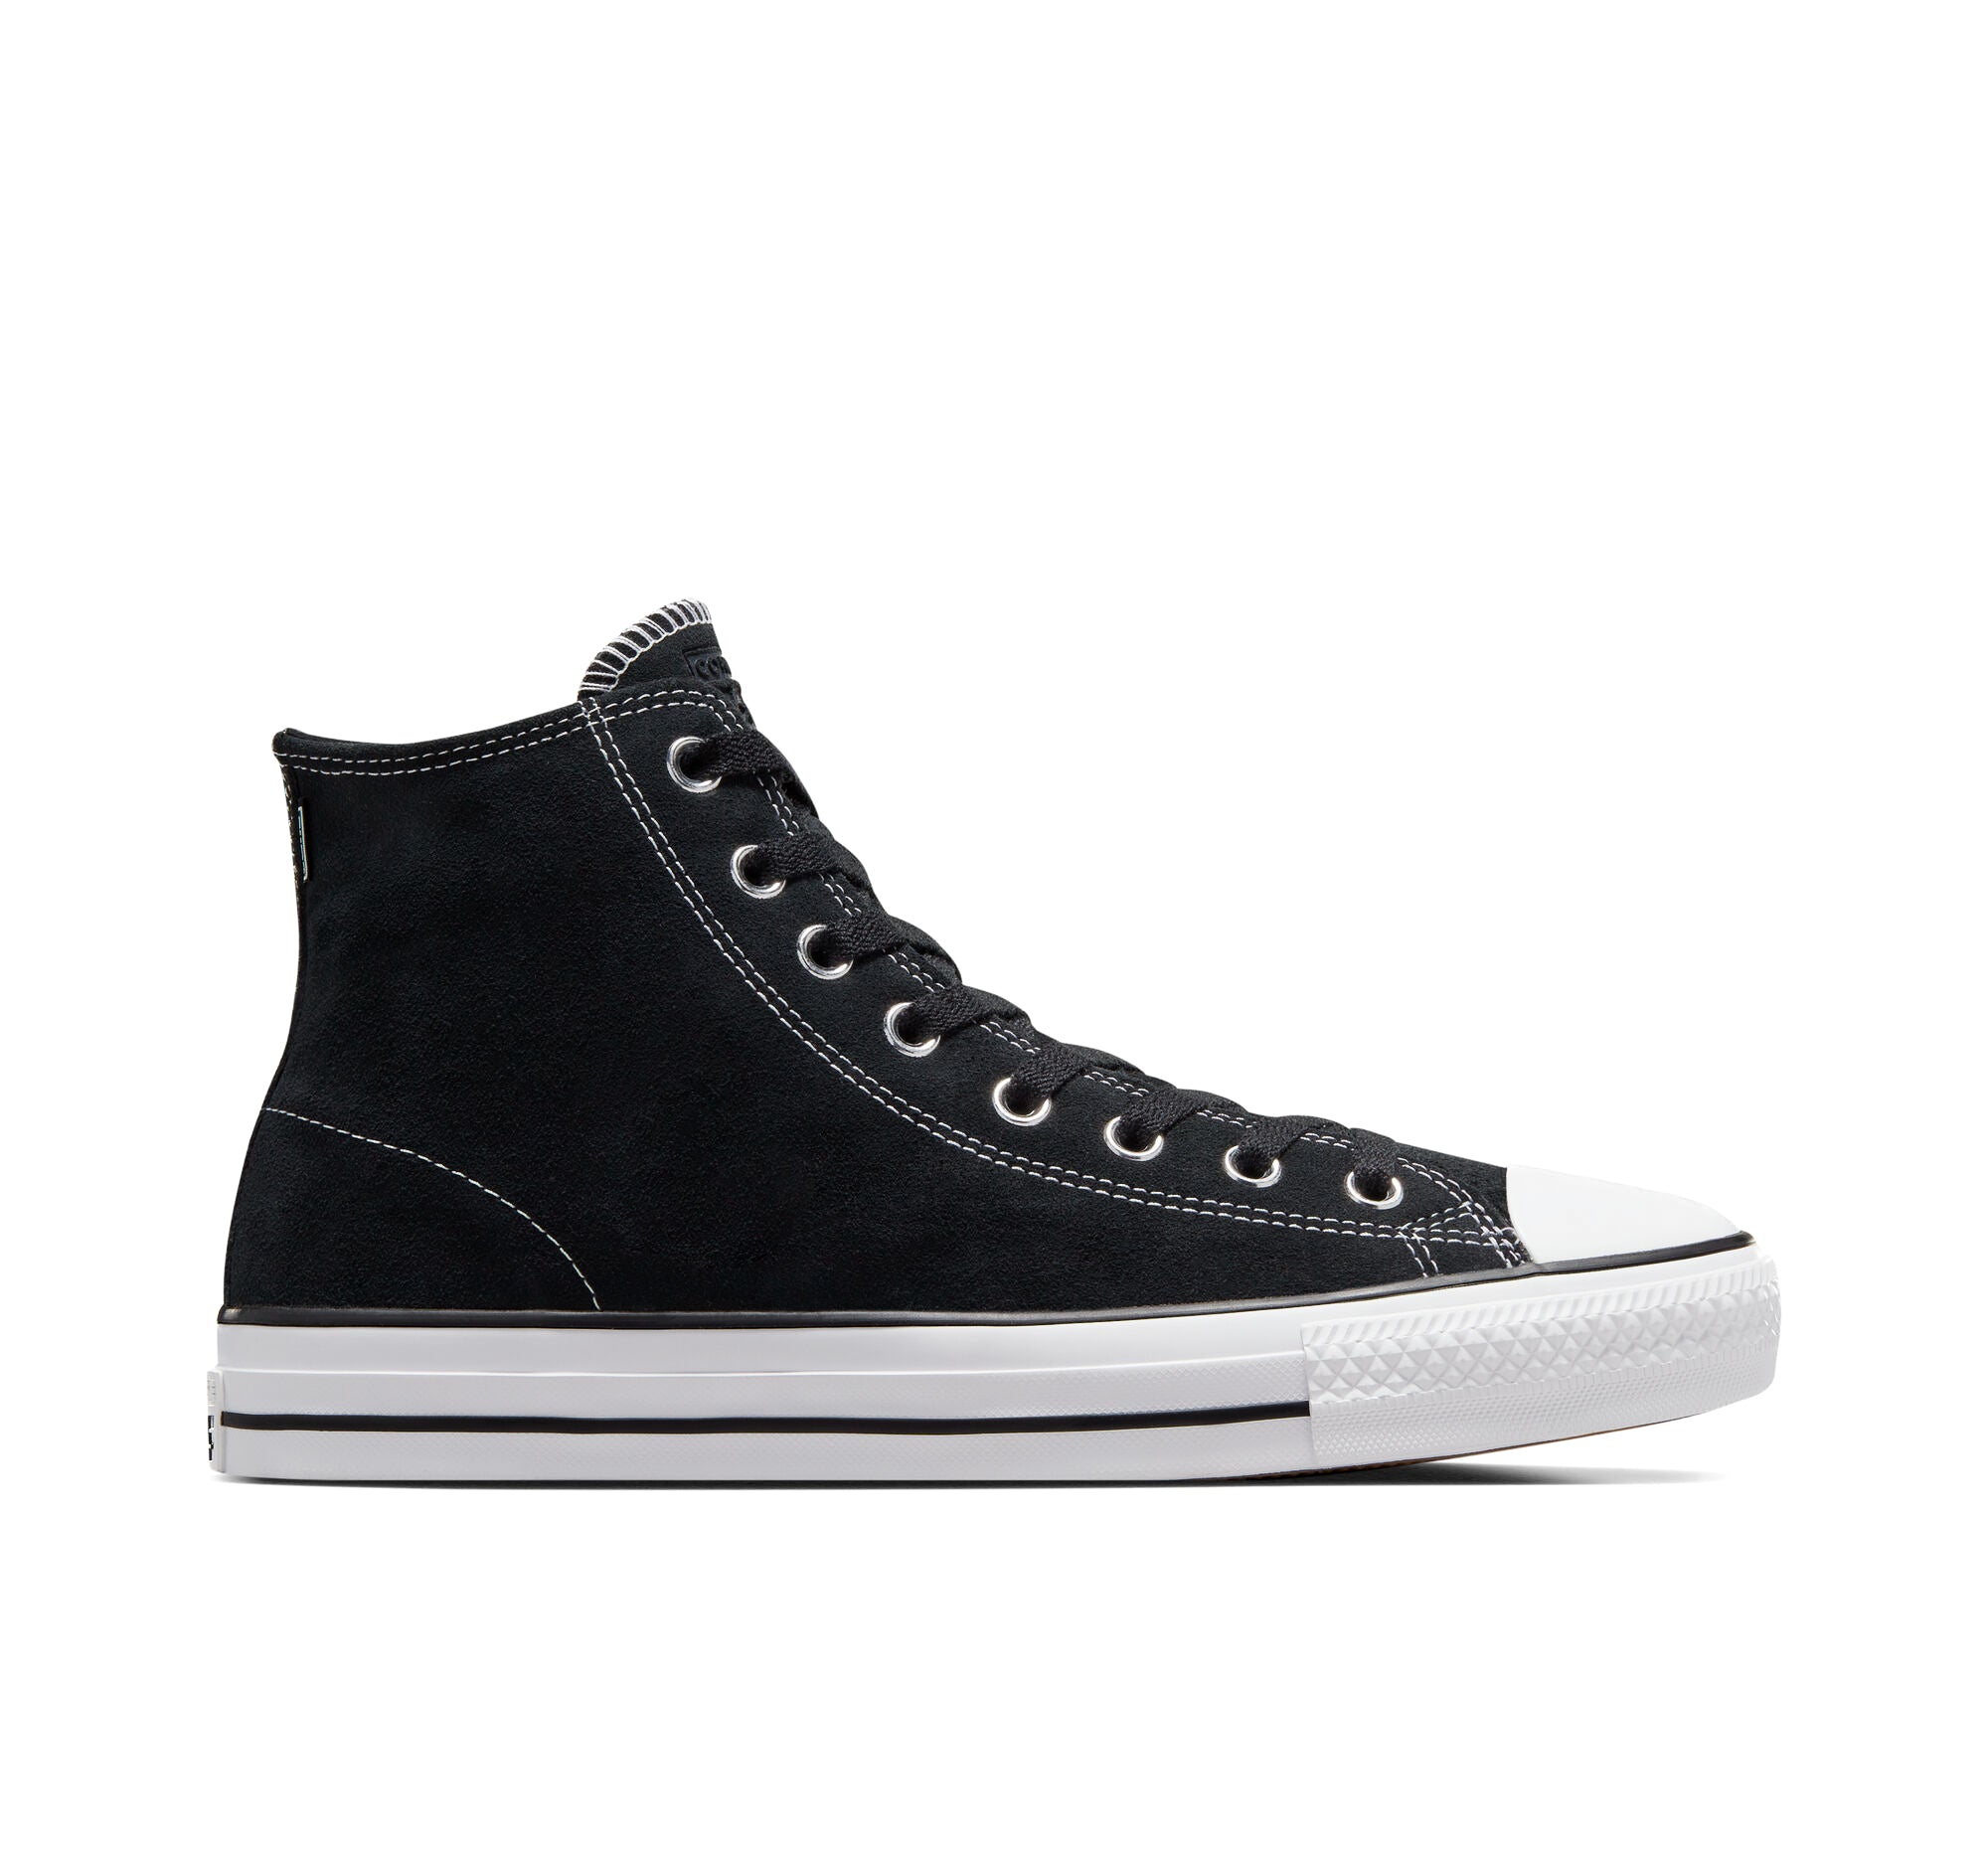 Converse CONS Chuck Taylor All Star Pro Suede Hi - Black/White ...